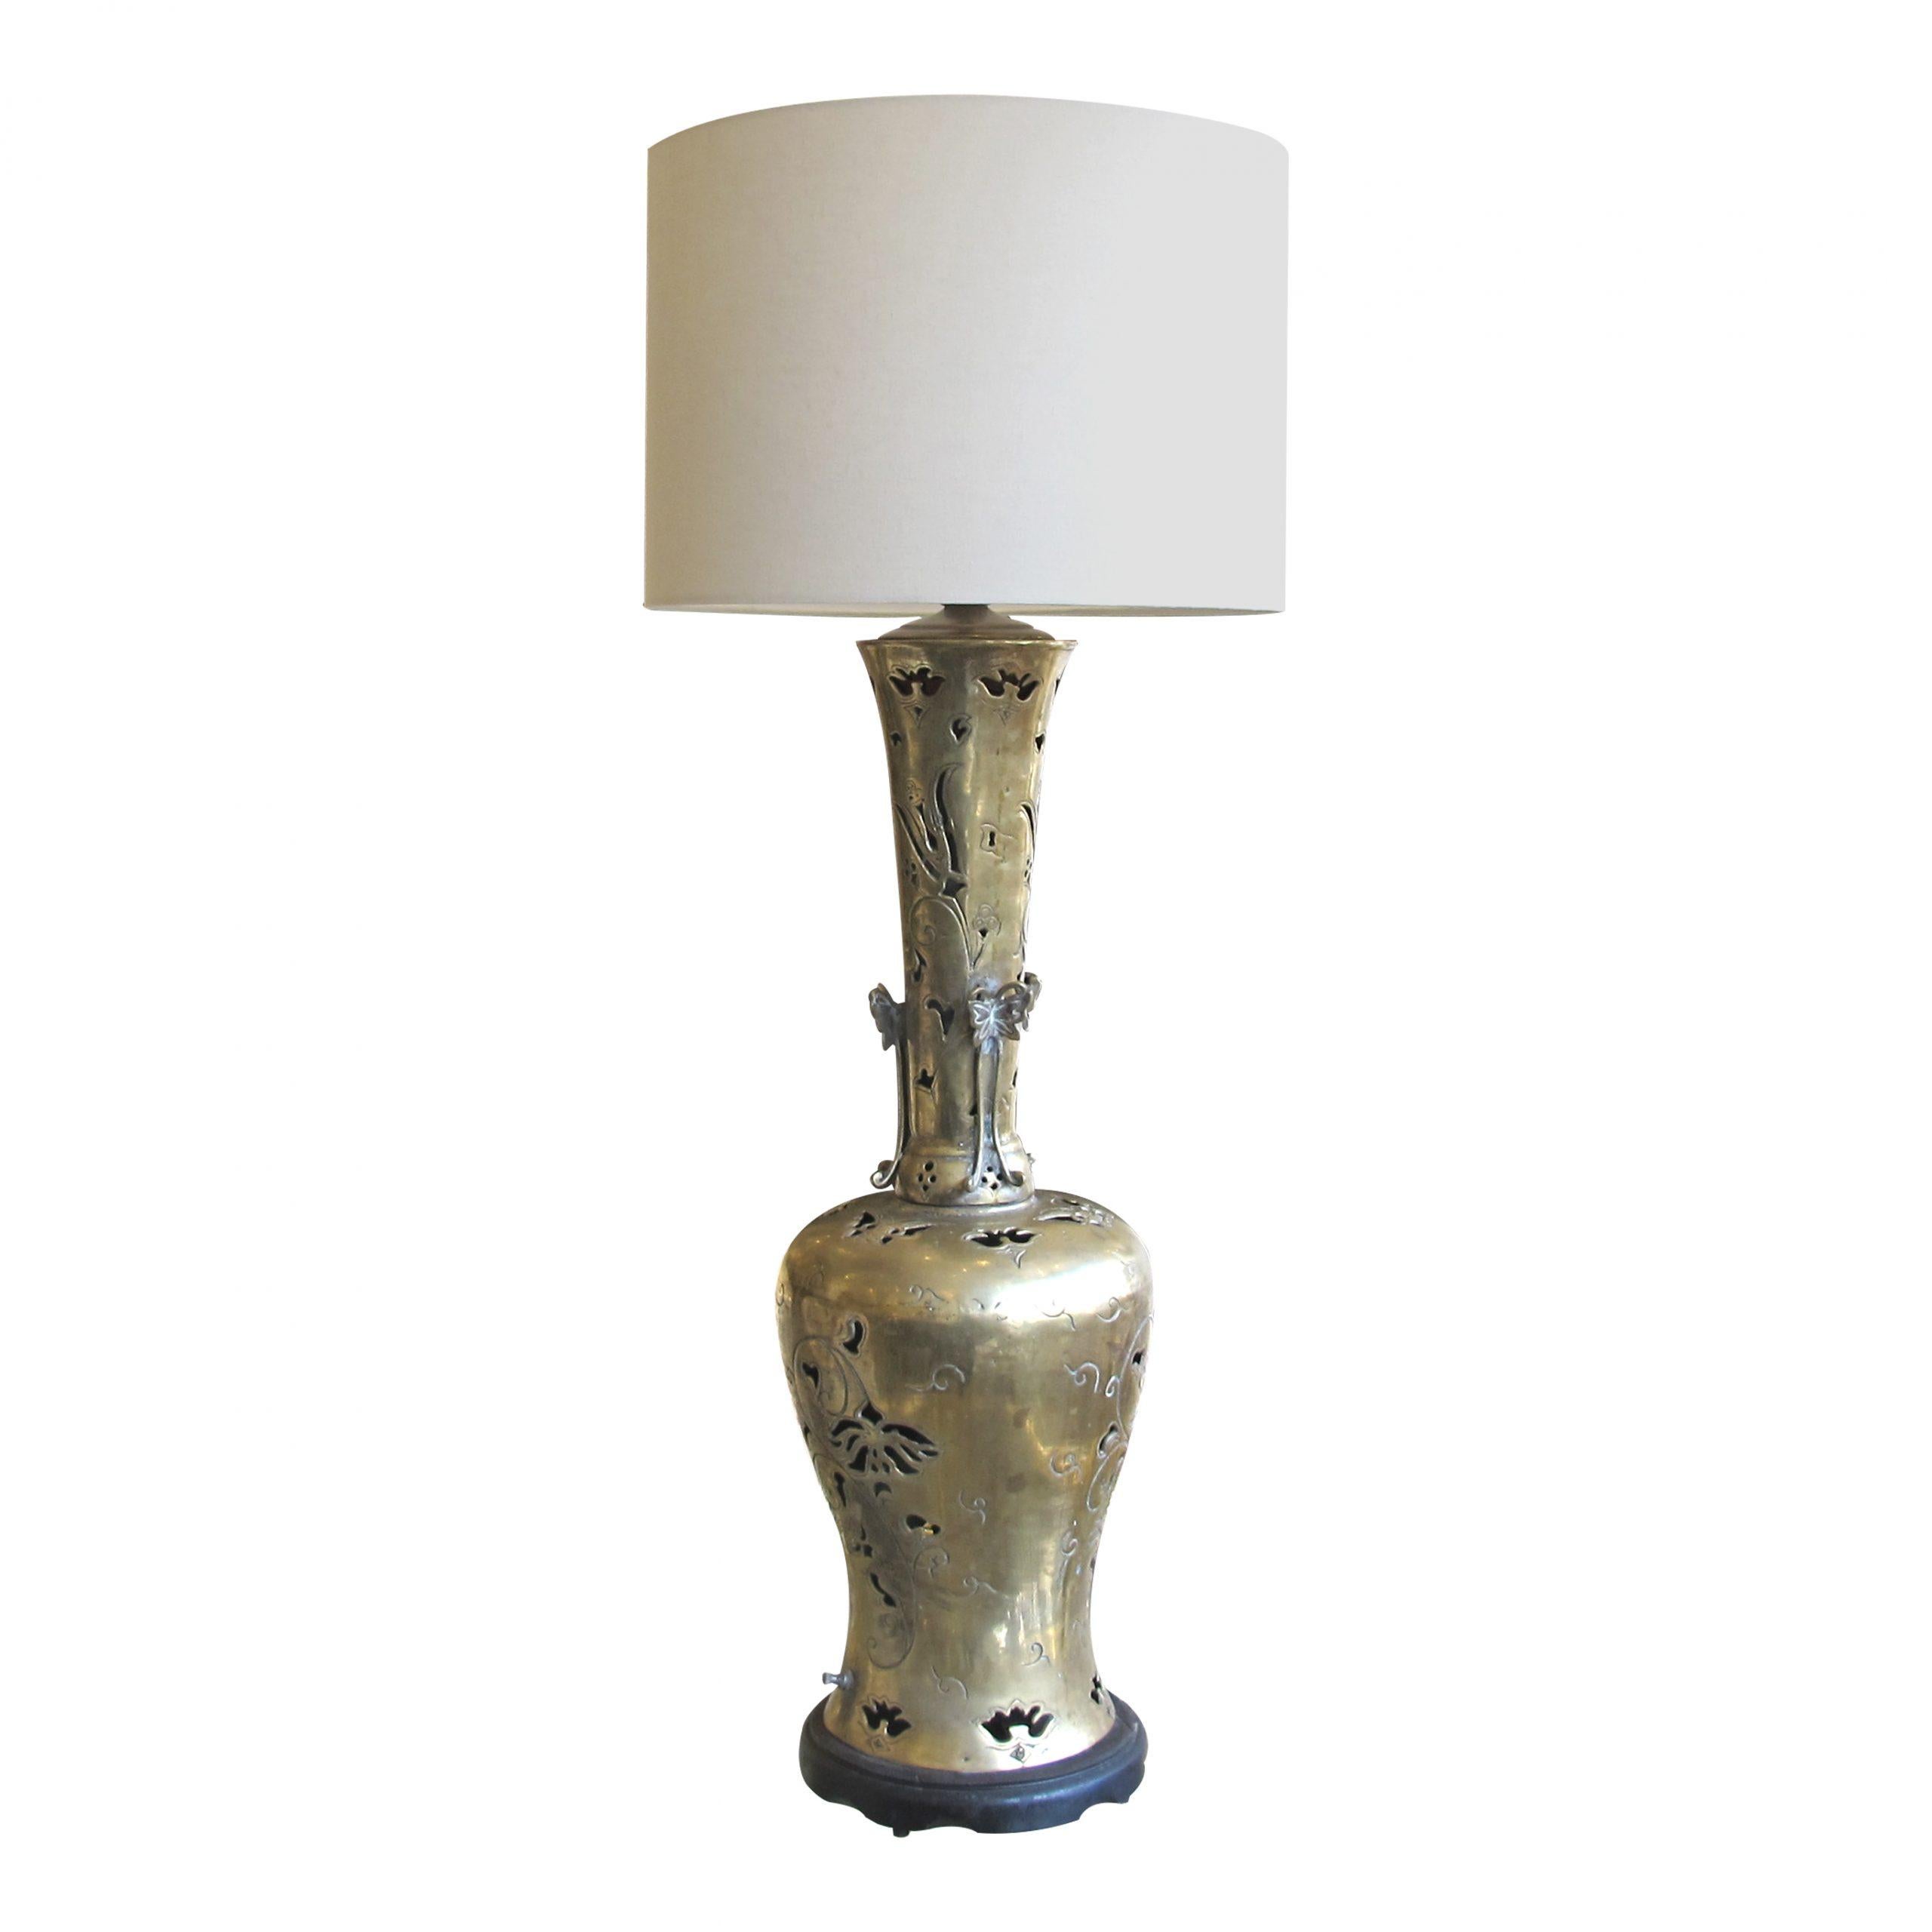 This is a rare large table lamp from around 1930. The lamp has generous and elegant curves and boasts delicate flower and butterflies’ carvings, the neck of the lamp shows three brass butterflies in relief. The lamp is presented on a black carved